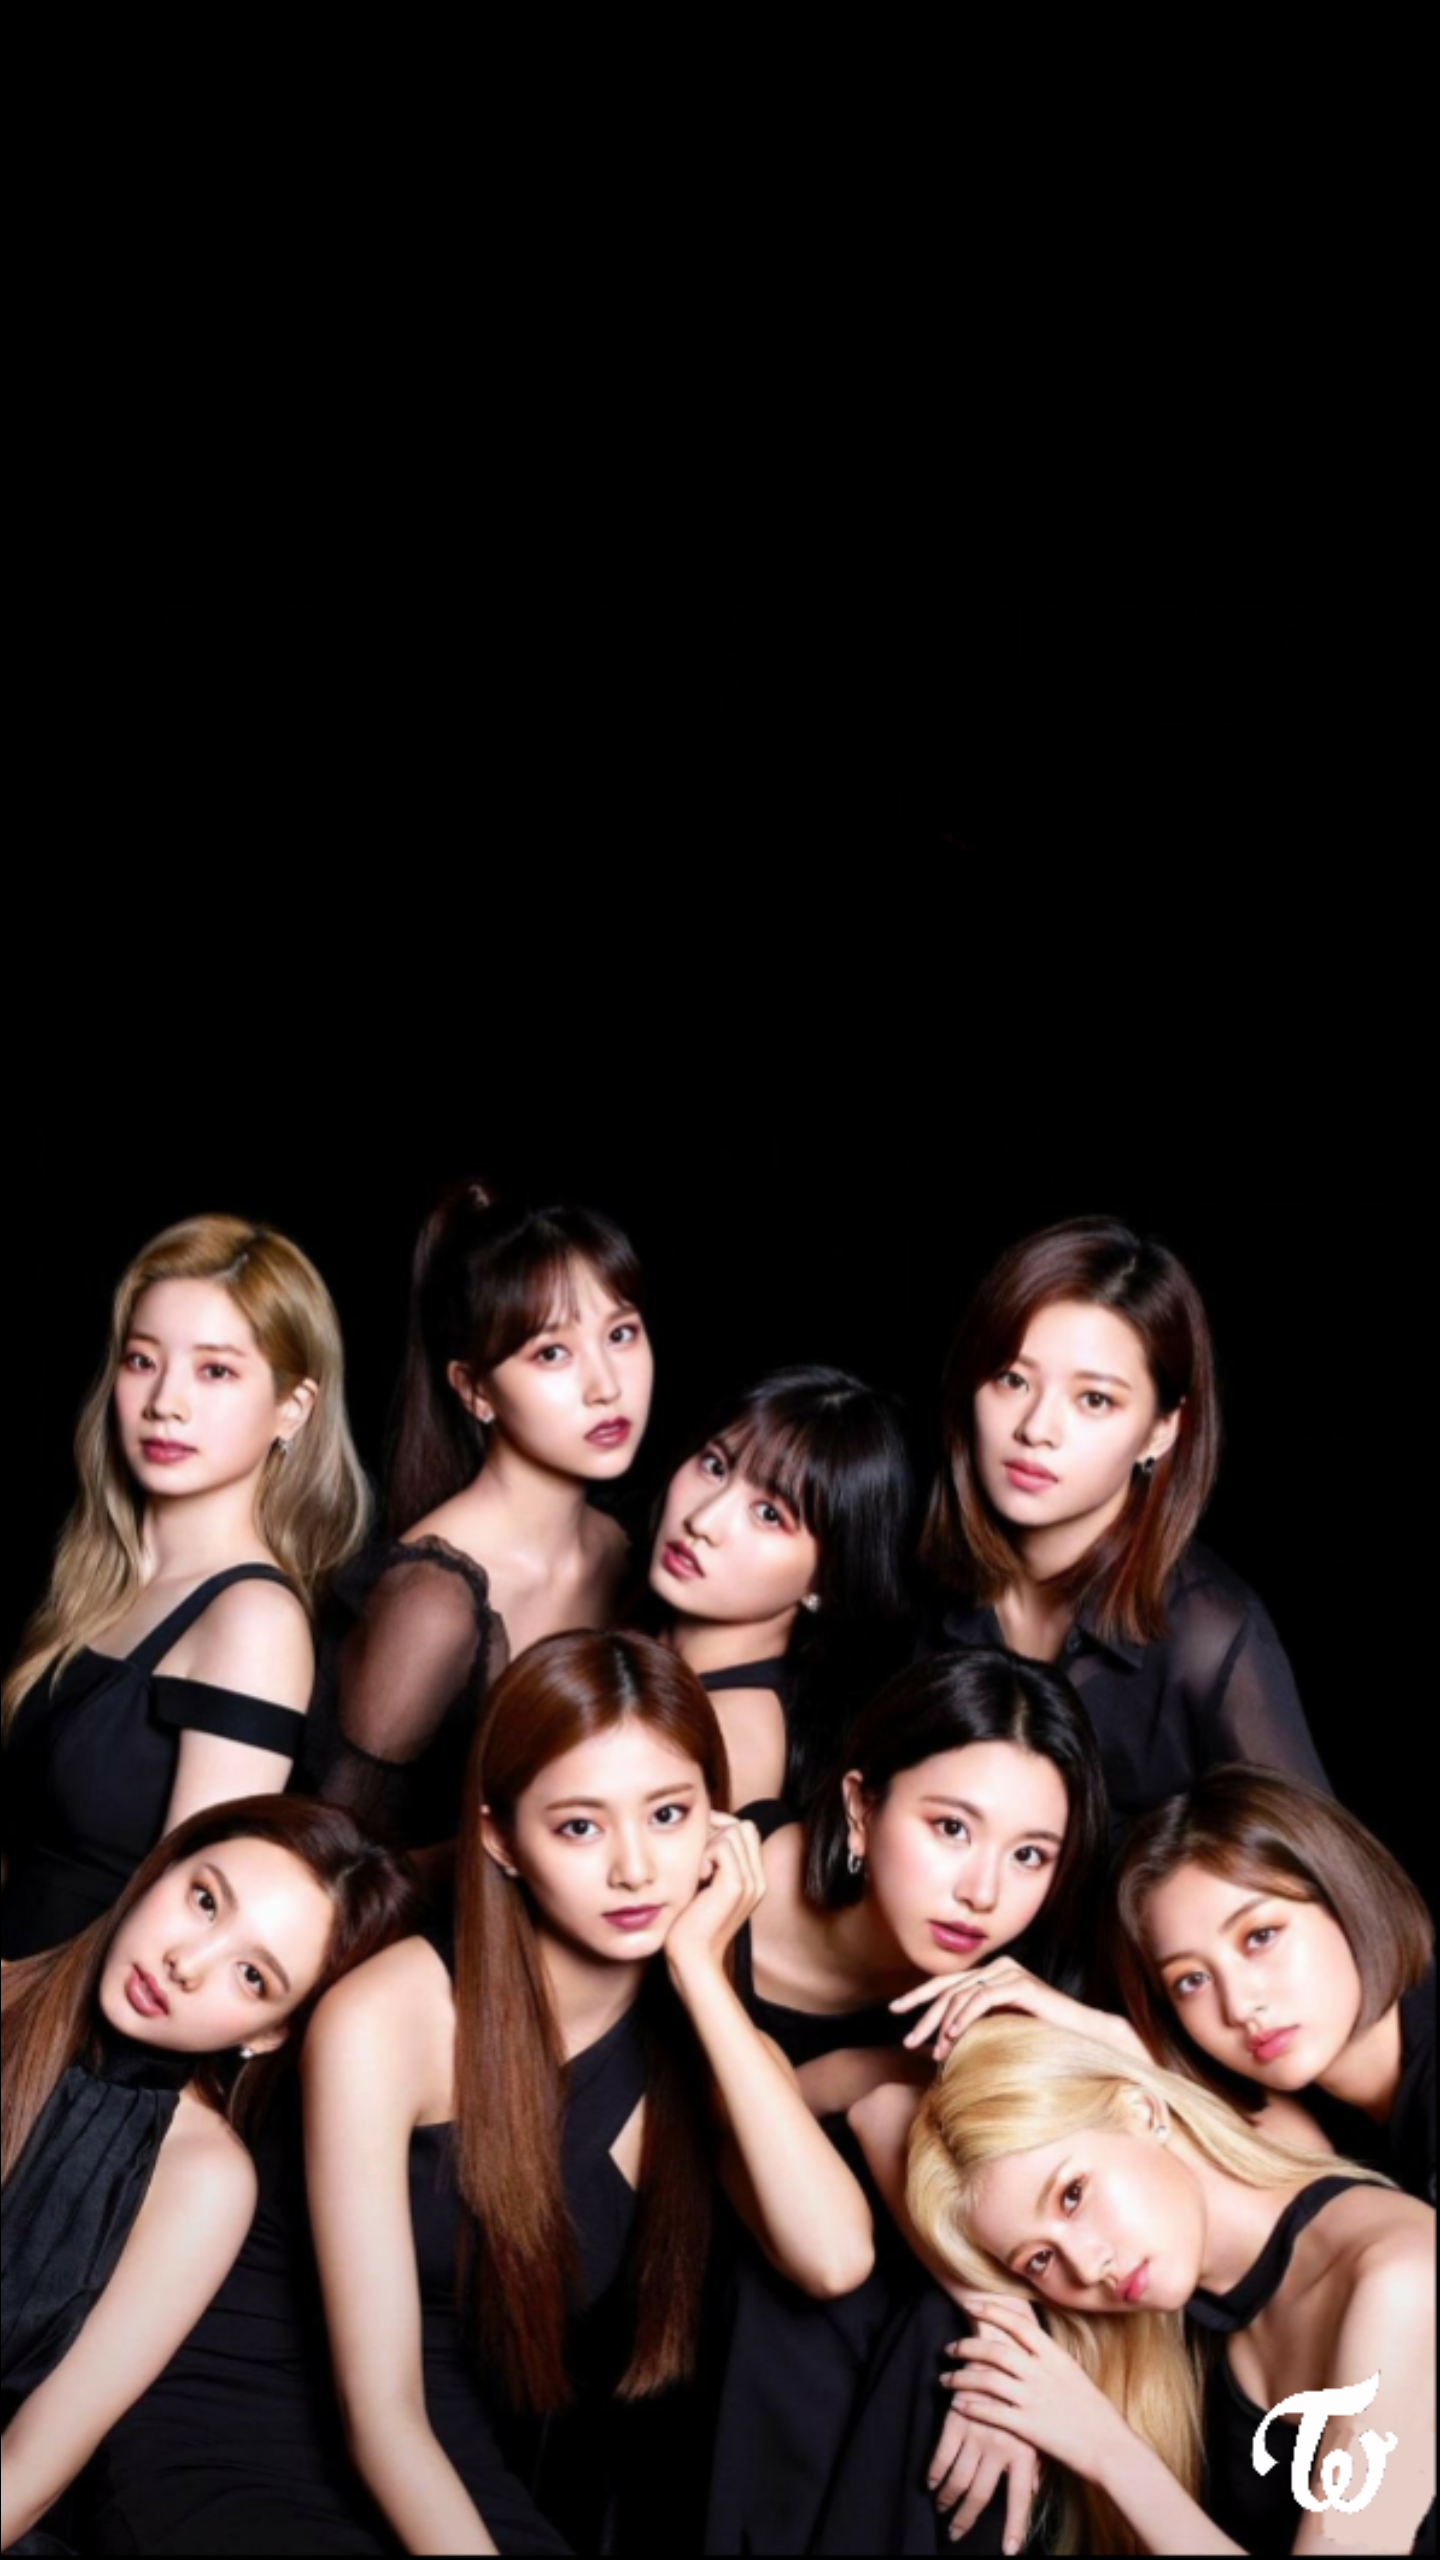 I made a TWICE Smartphone Wallpaper. I'm just proud of it, so I posted it here